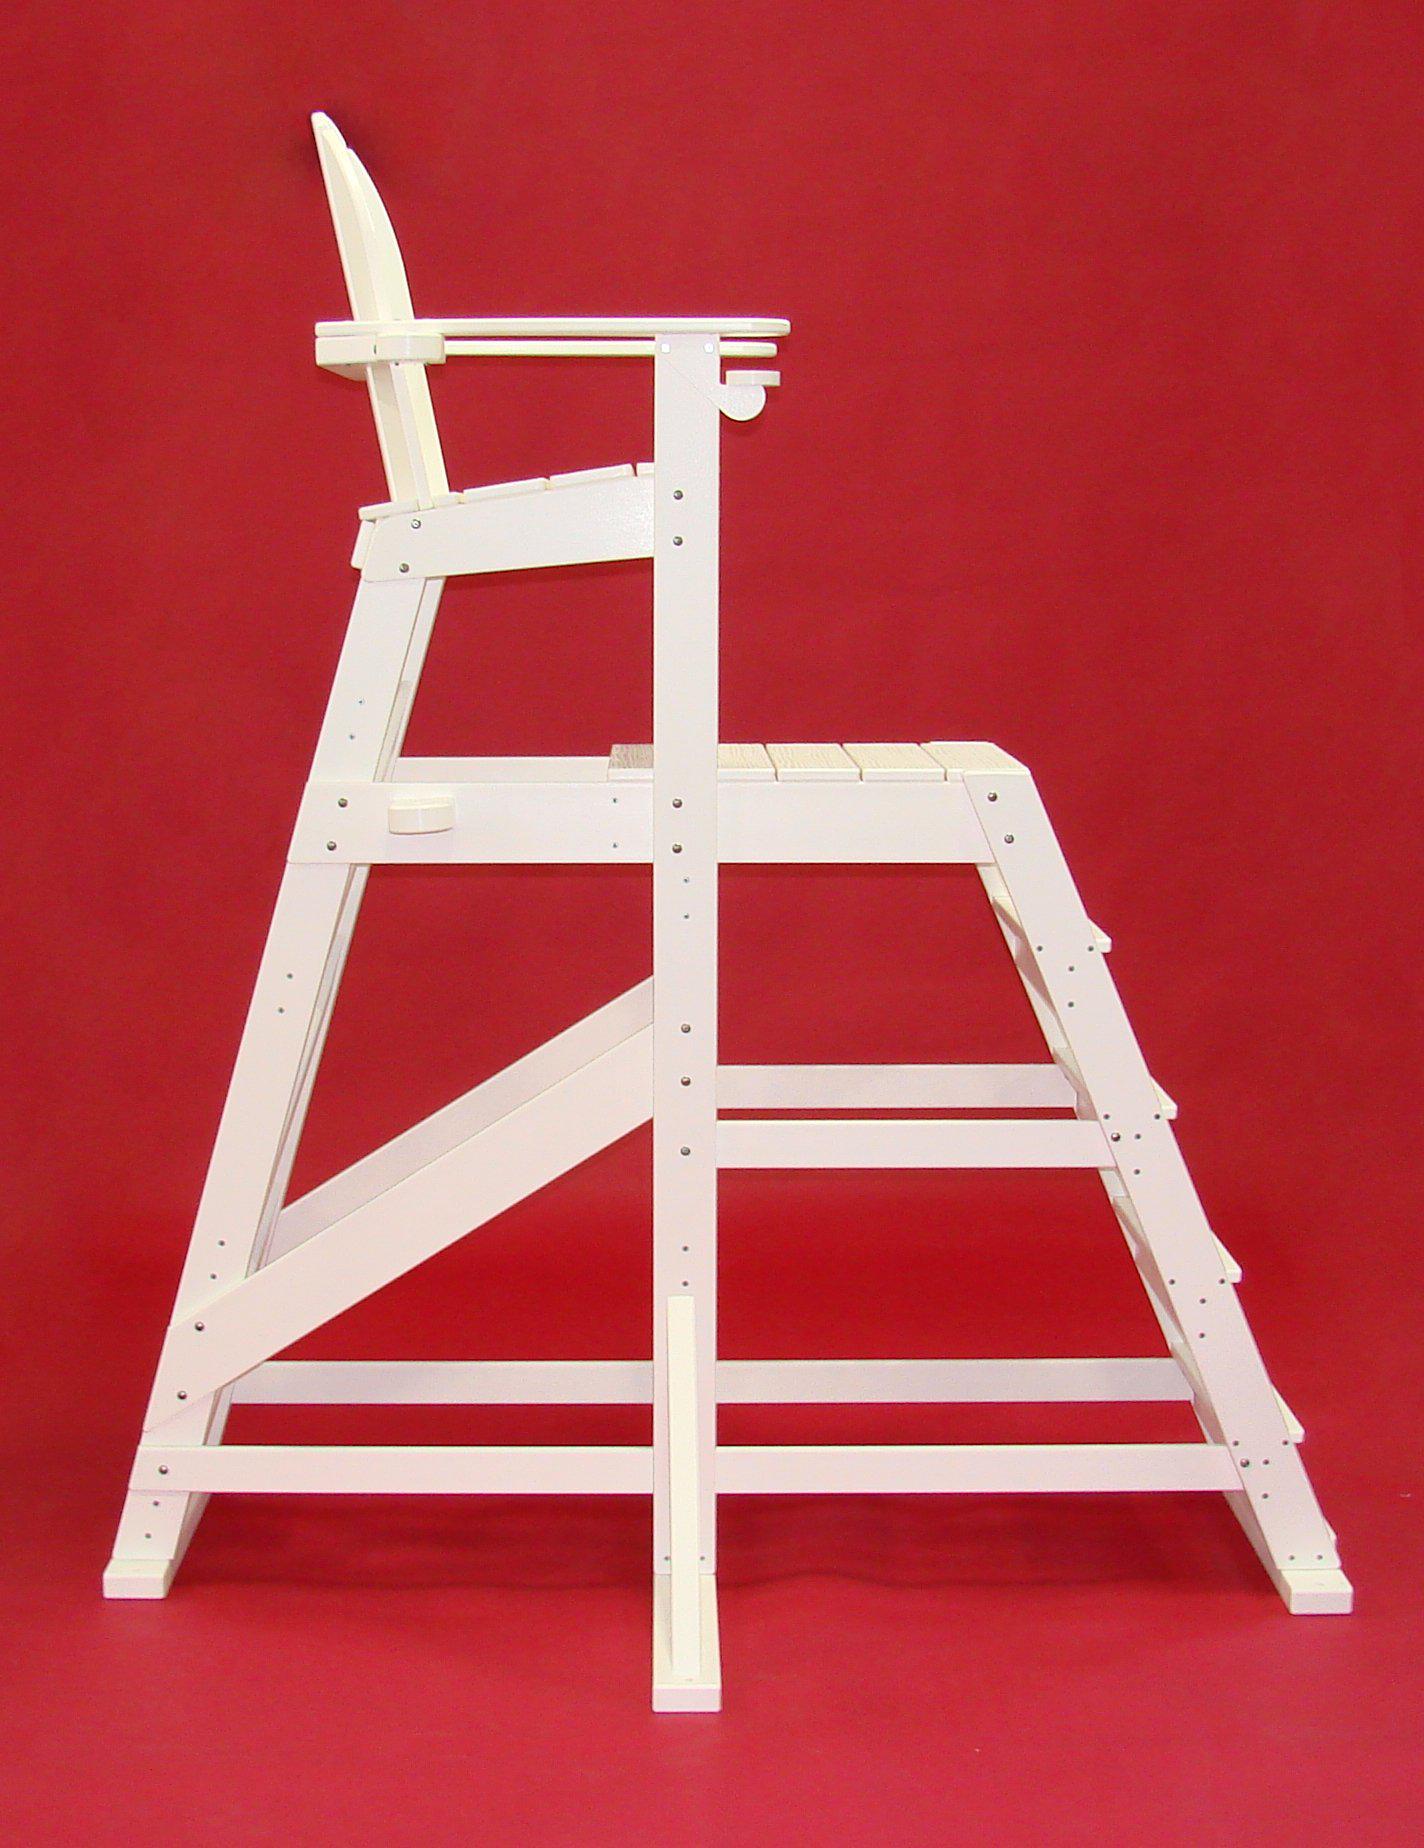 Tailwind Furniture Recycled Plastic TLG-535 Tall Lifeguard Chair - With Front Ladder - Seat Height: 64" - LEAD TIME TO SHIP 20 BUSINESS DAYS